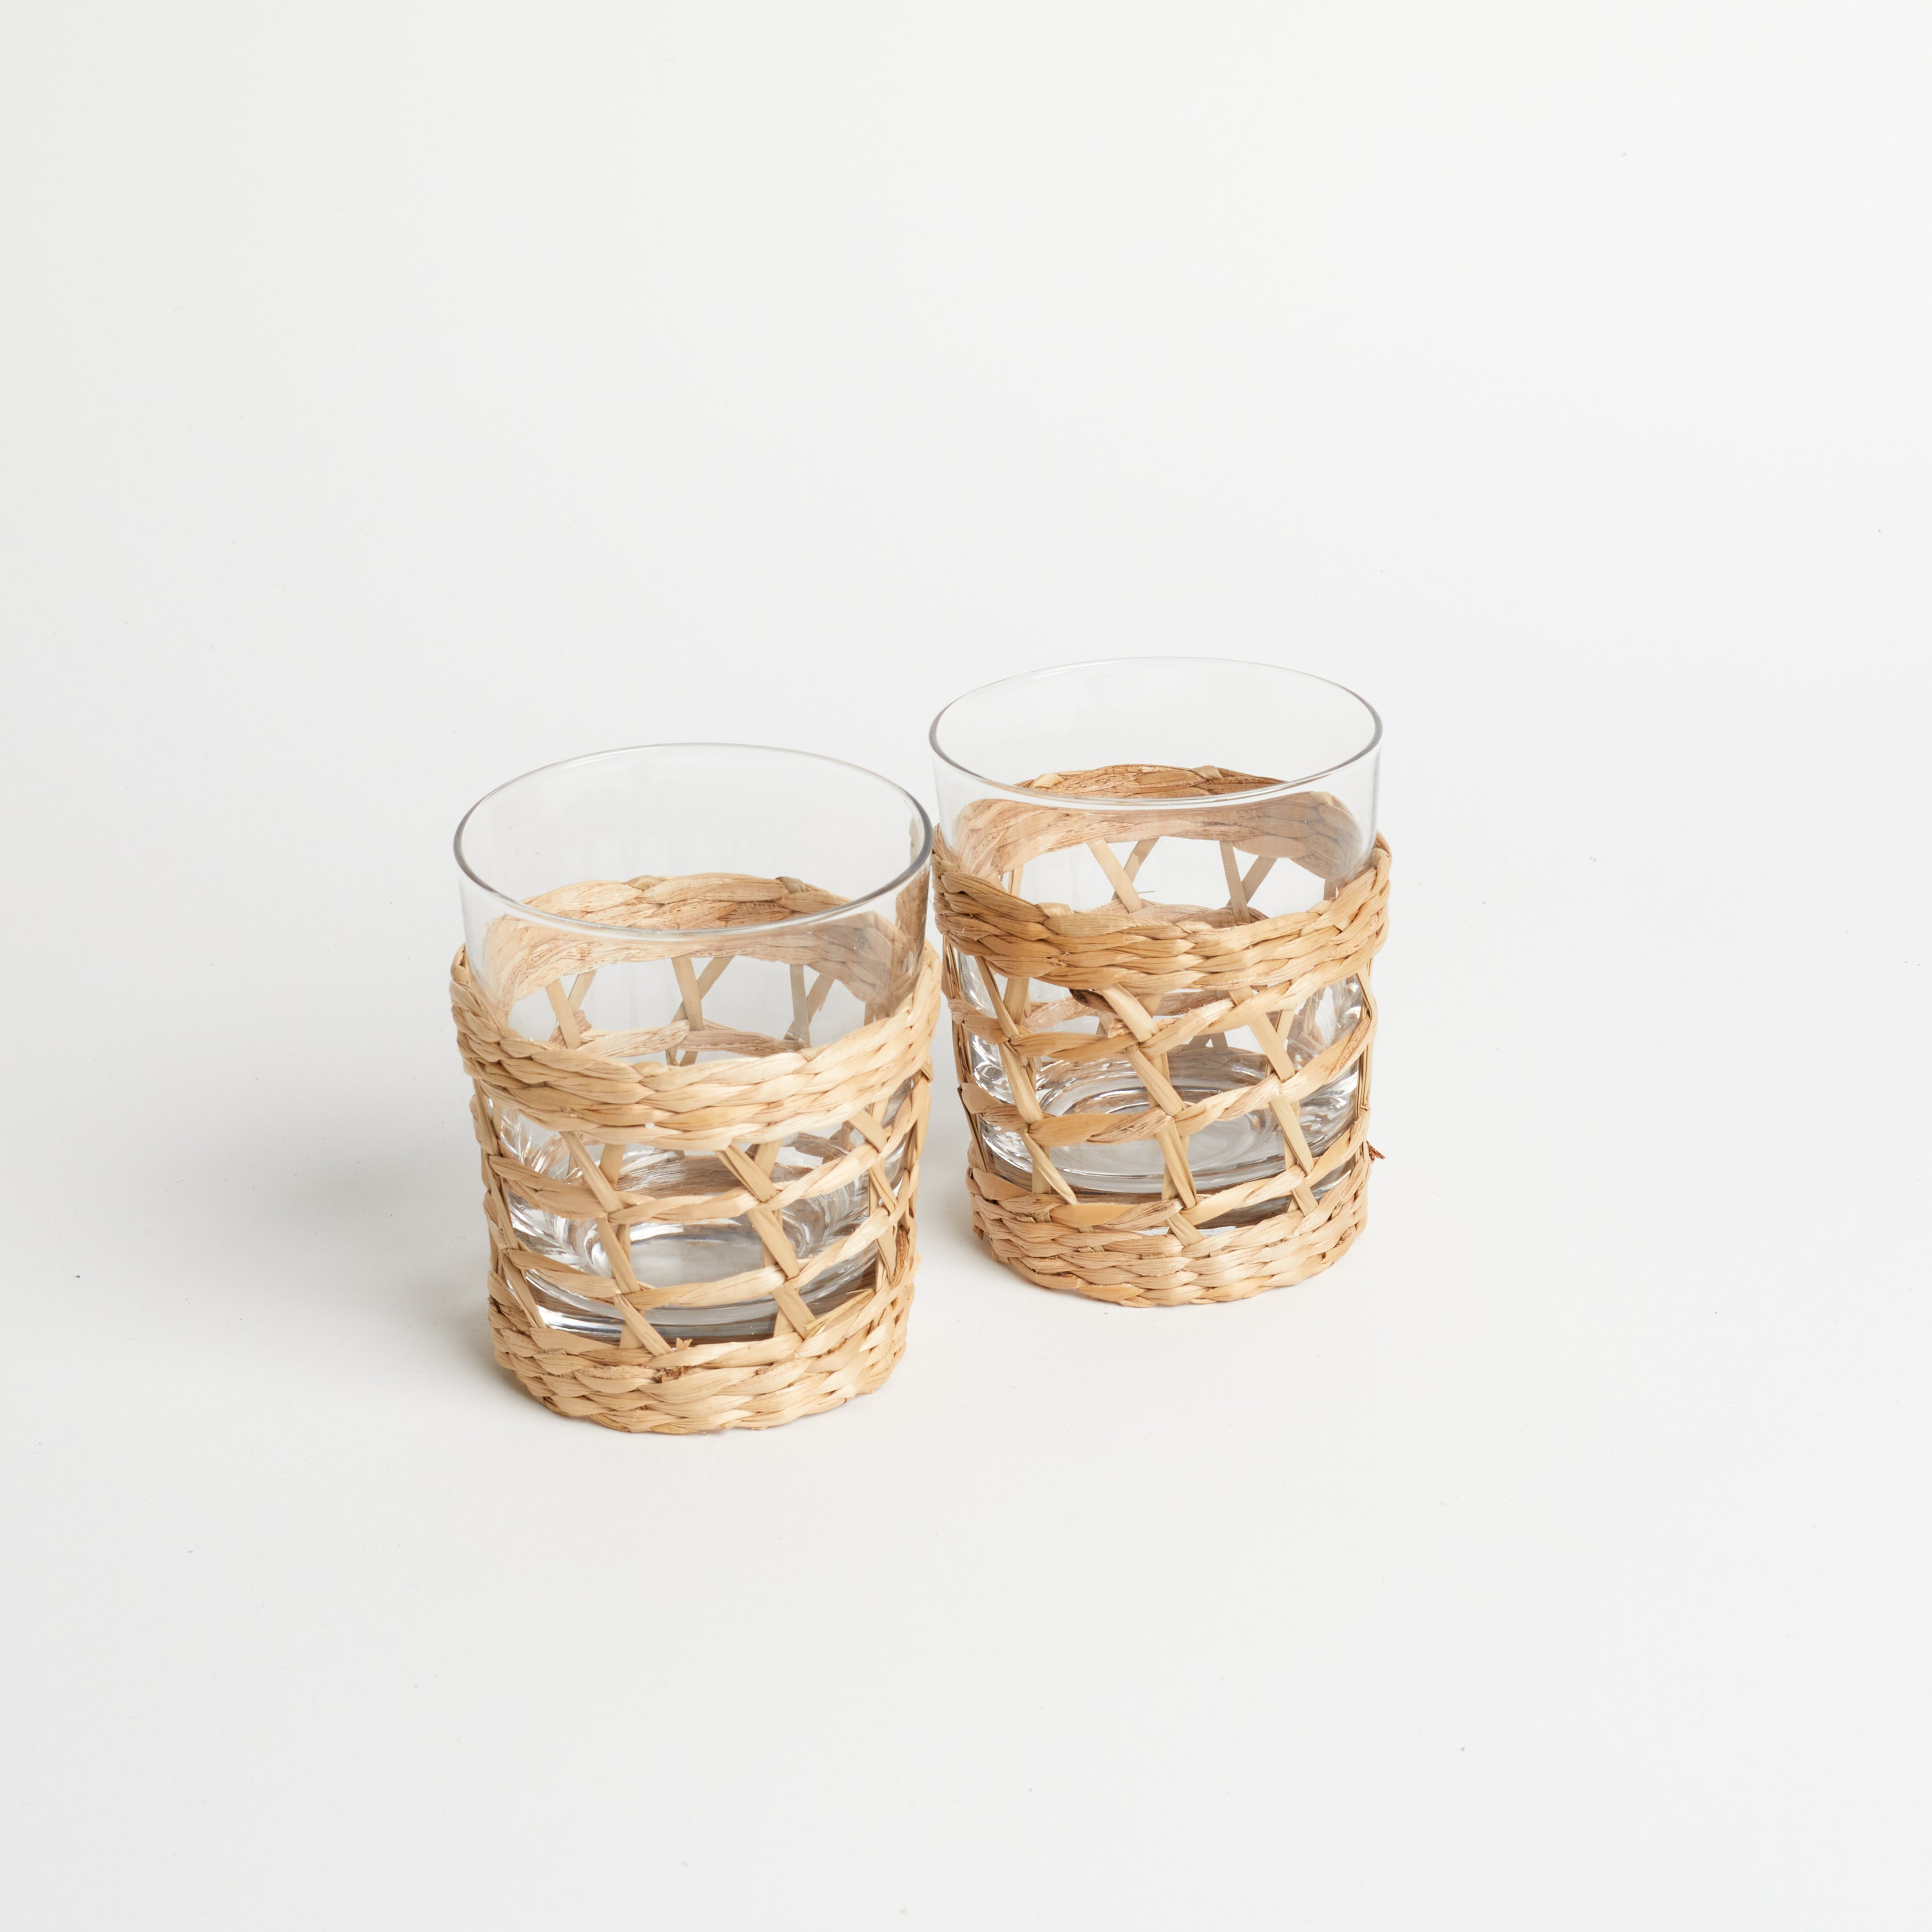 Two seaglass cups wrapped in rattan sitting on a white table against a white background